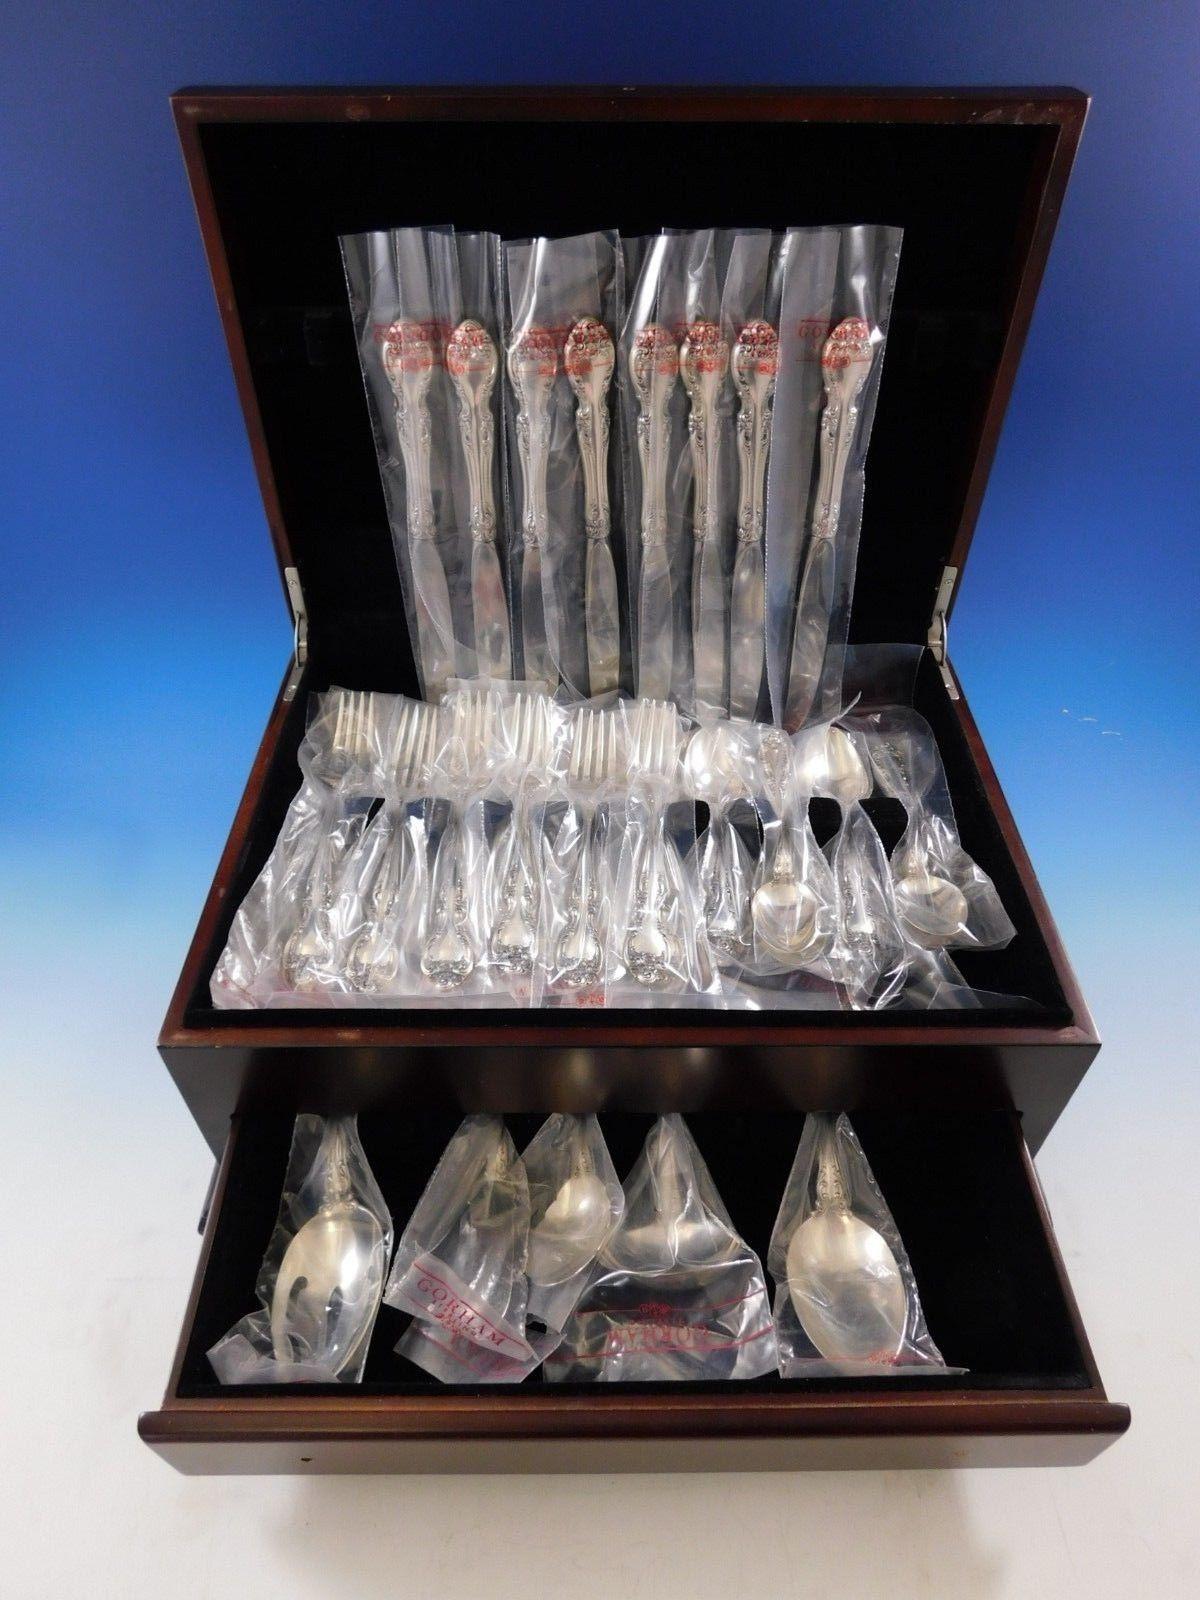 Melrose by Gorham sterling silver place size flatware set, 37 pieces. This set includes:

8 place knives, 9 1/4